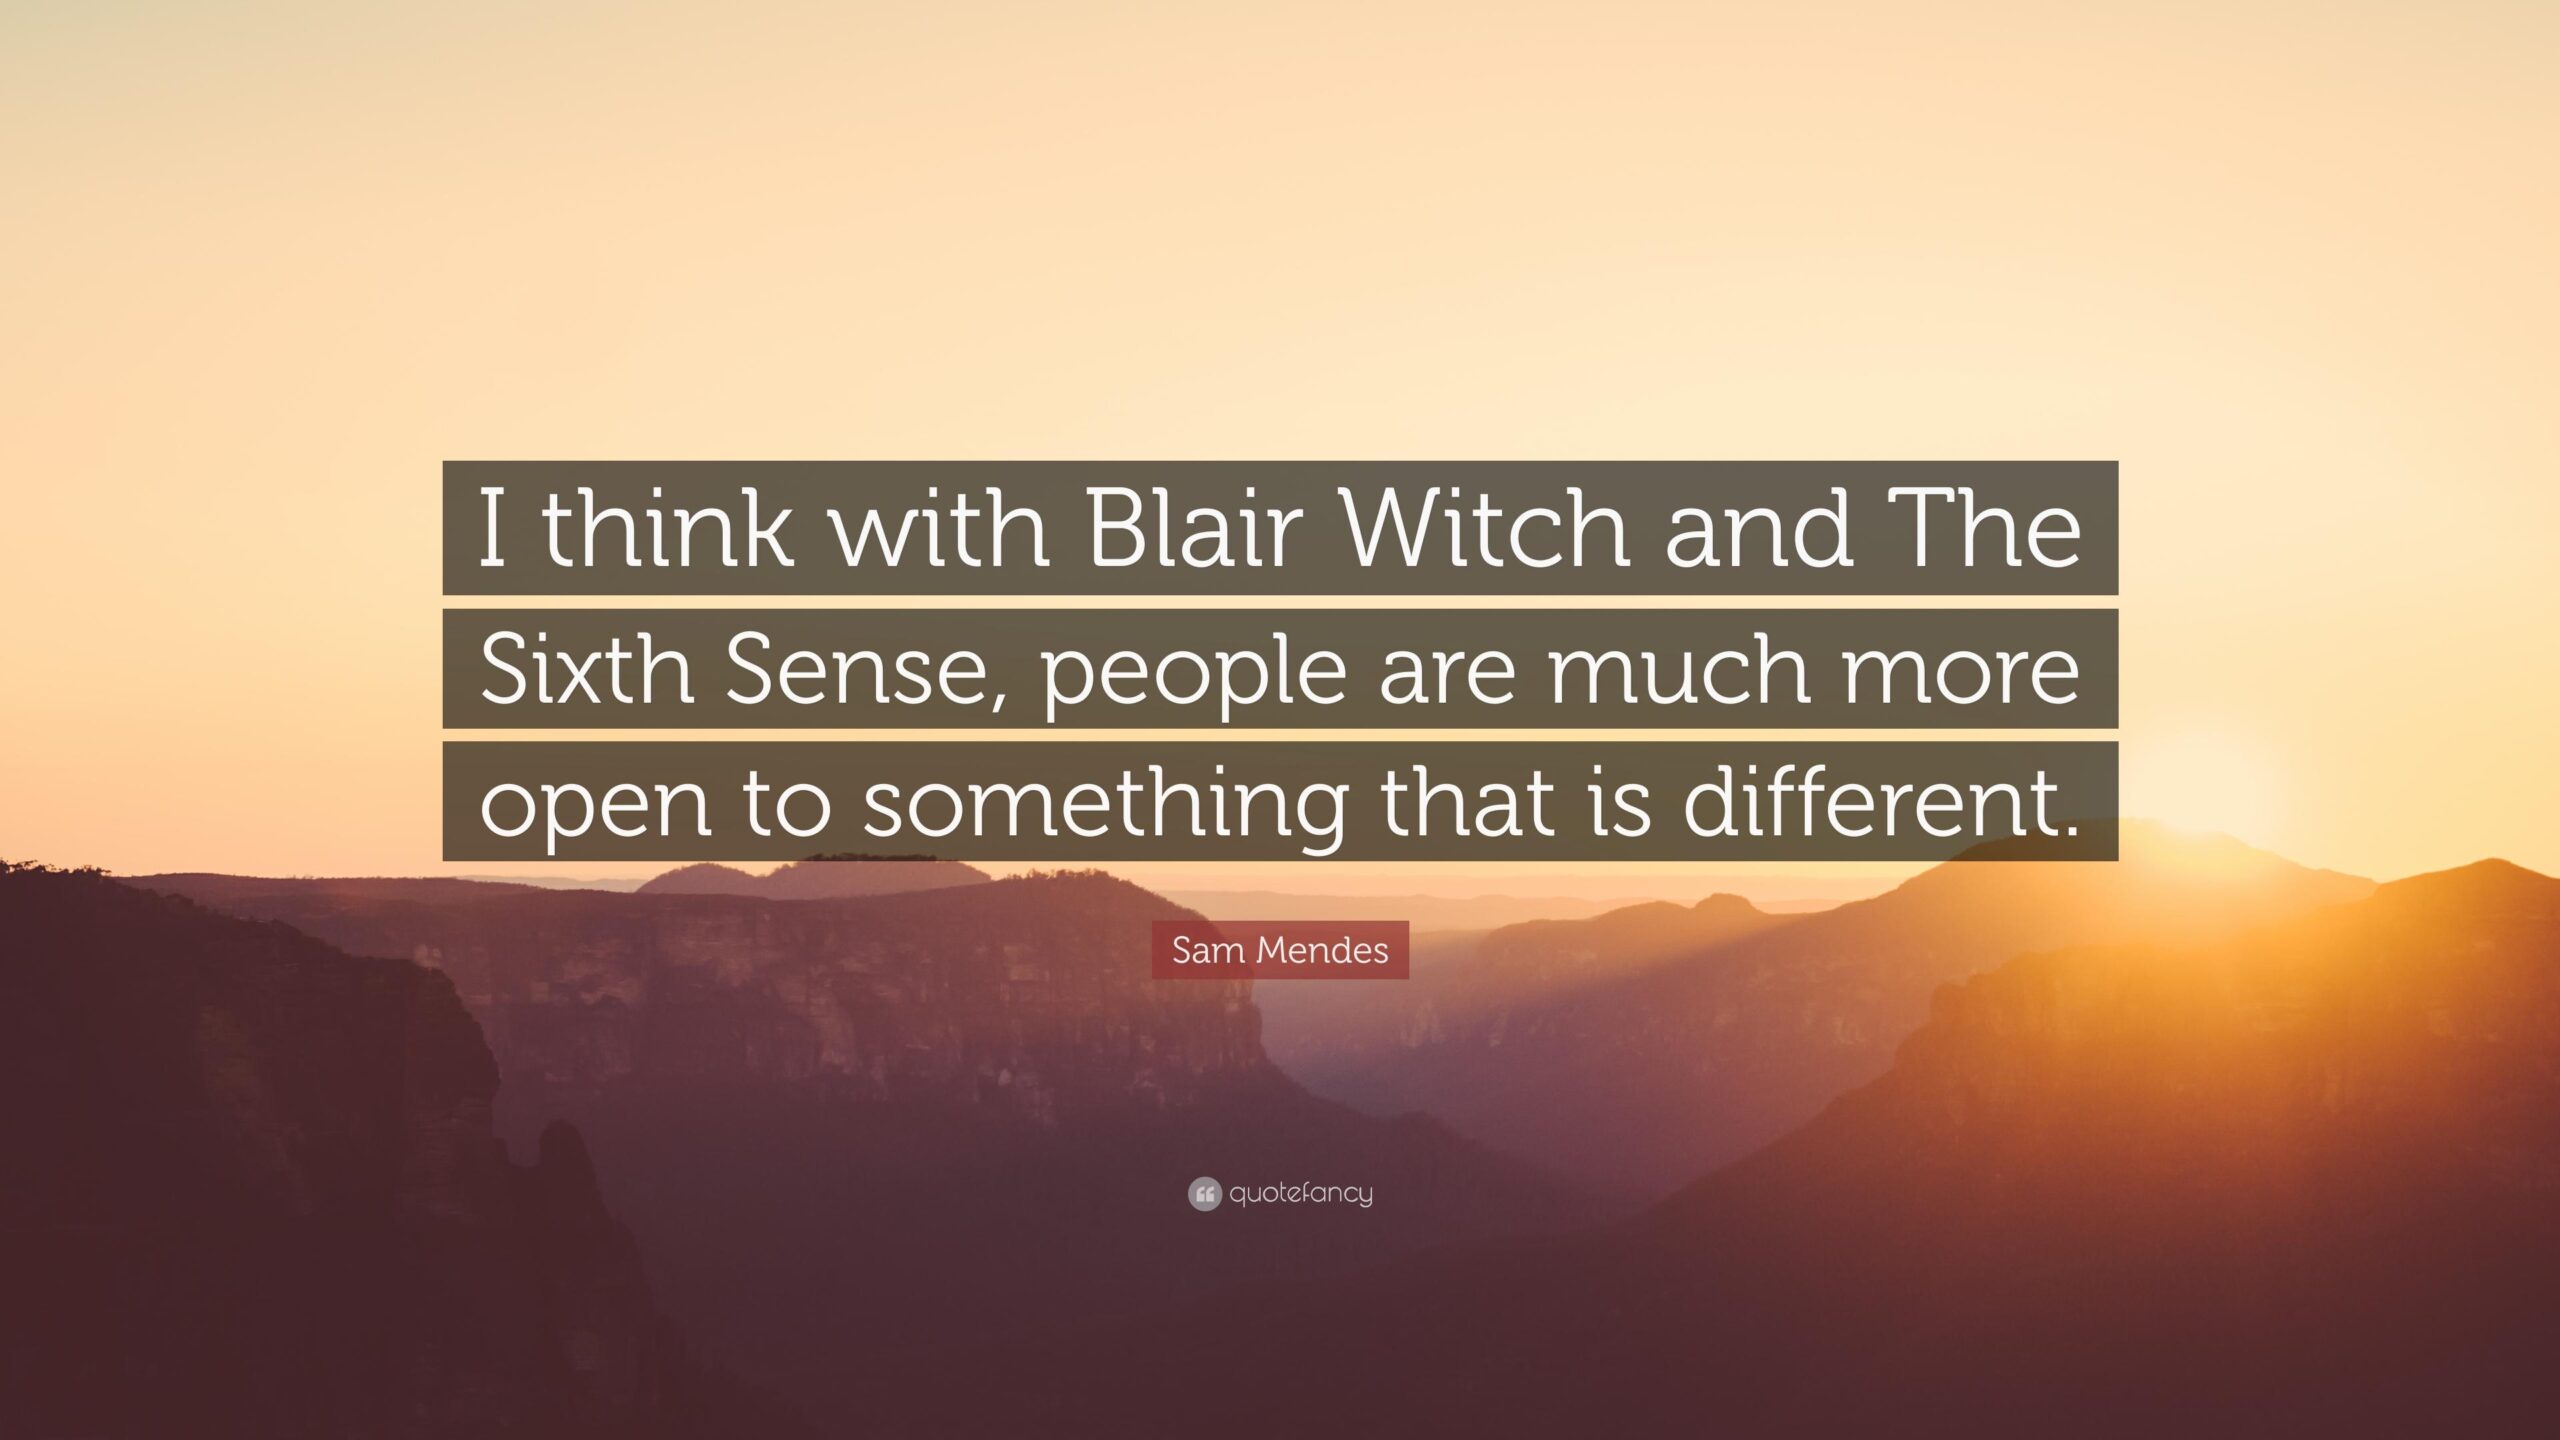 Sam Mendes Quote “I think with Blair Witch and The Sixth Sense